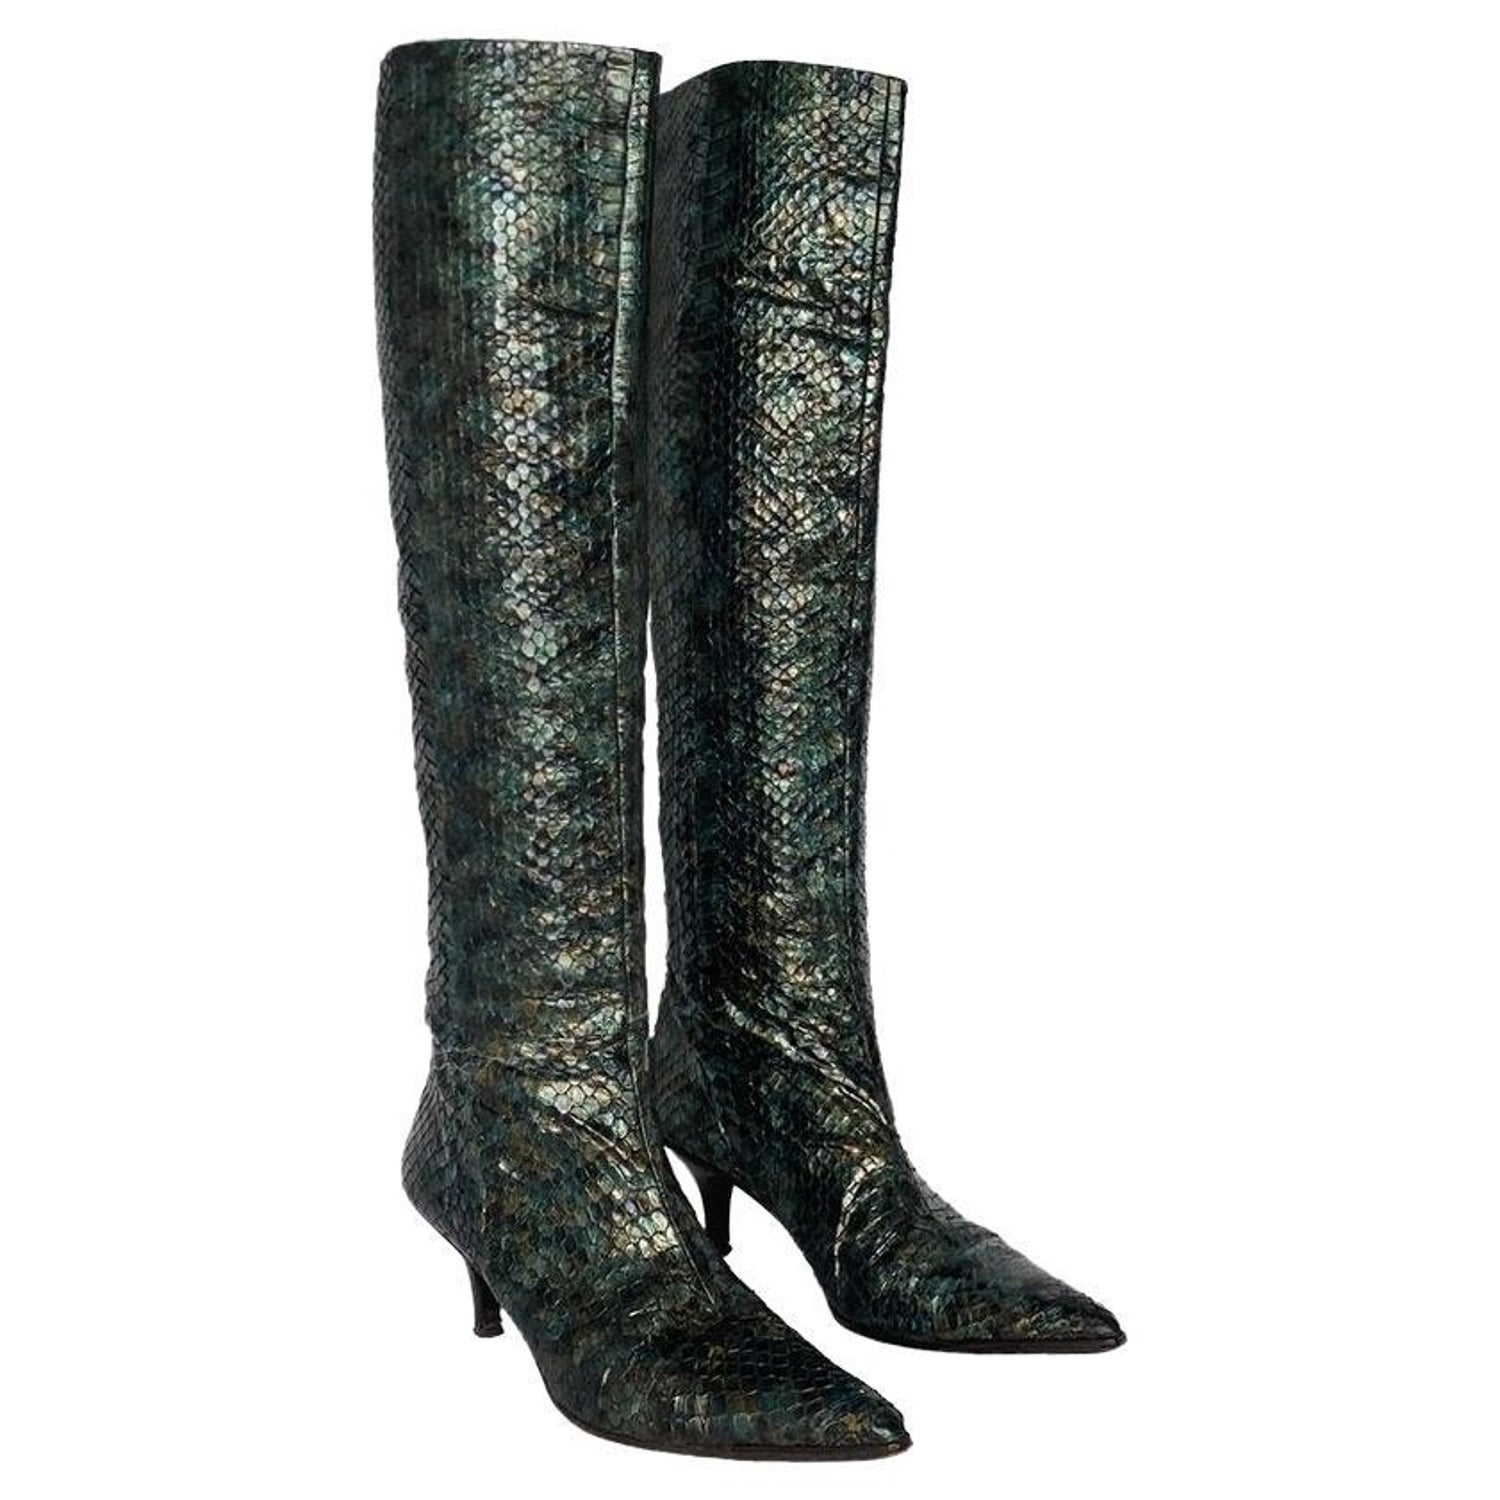 Gucci Snakeskin - 7 For Sale on 1stDibs gucci boots snake, gucci snake print boots, gucci boots with snake on bottom